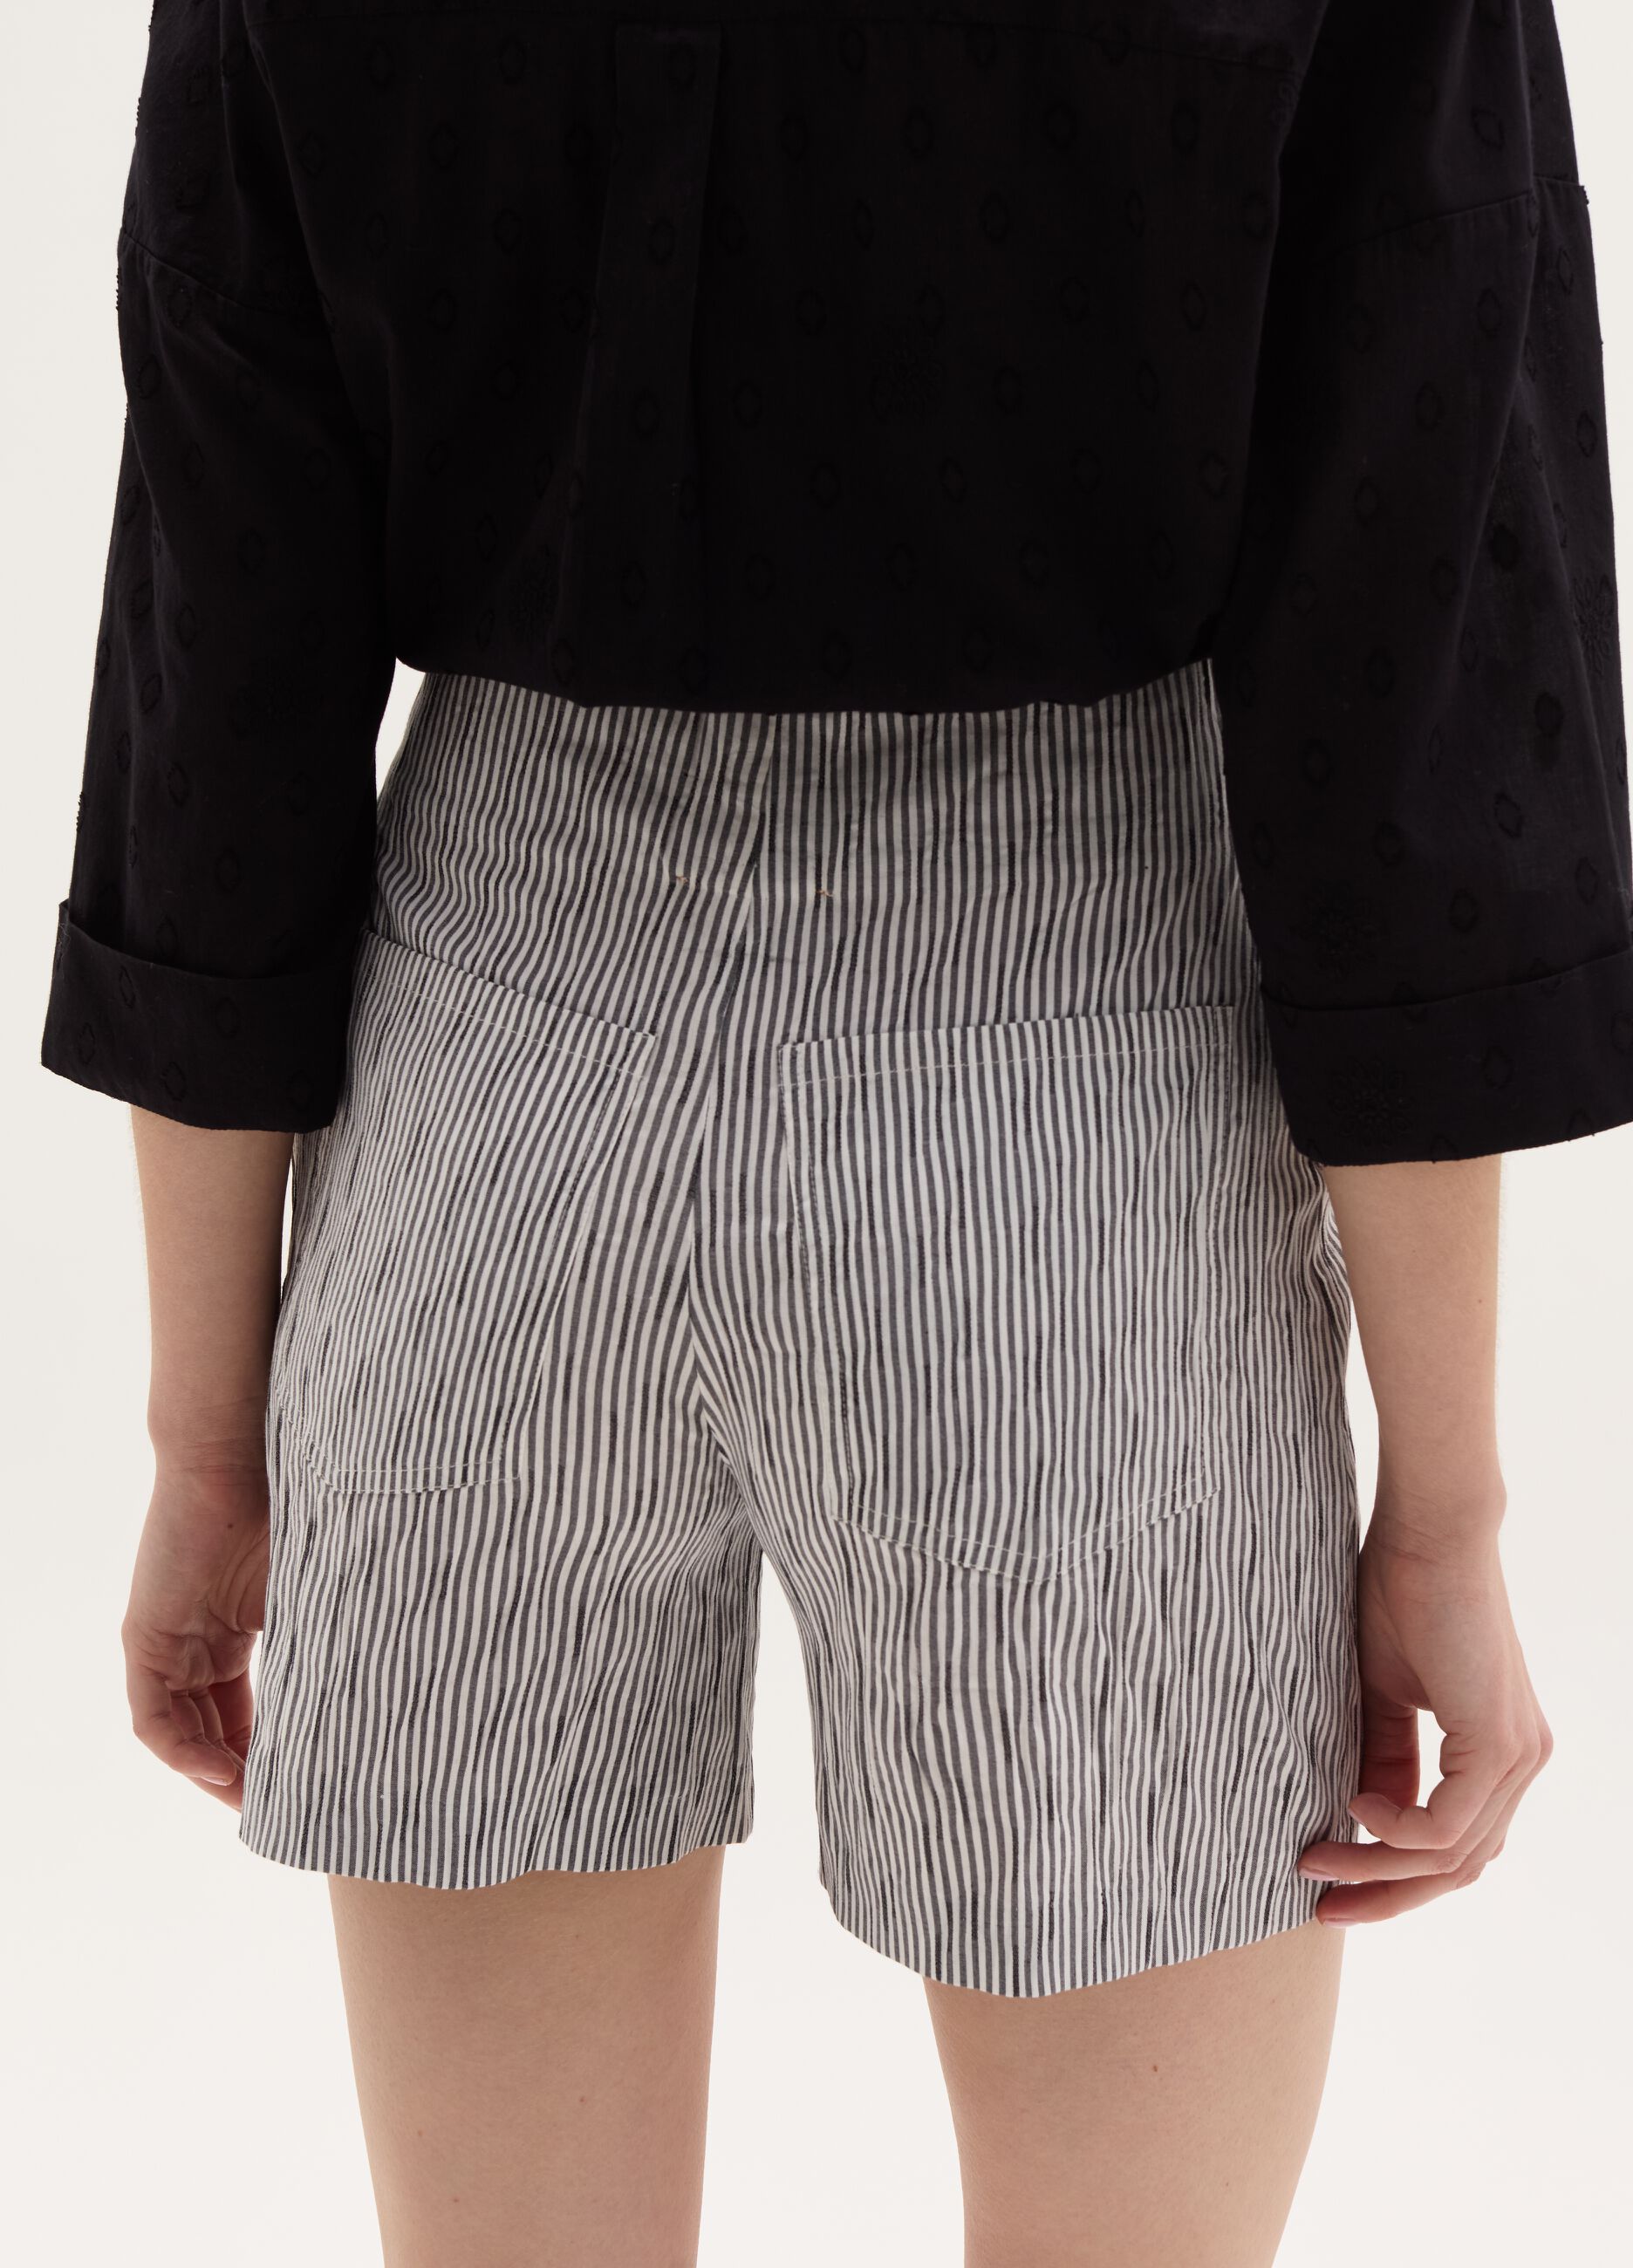 Maternity shorts with thin stripes